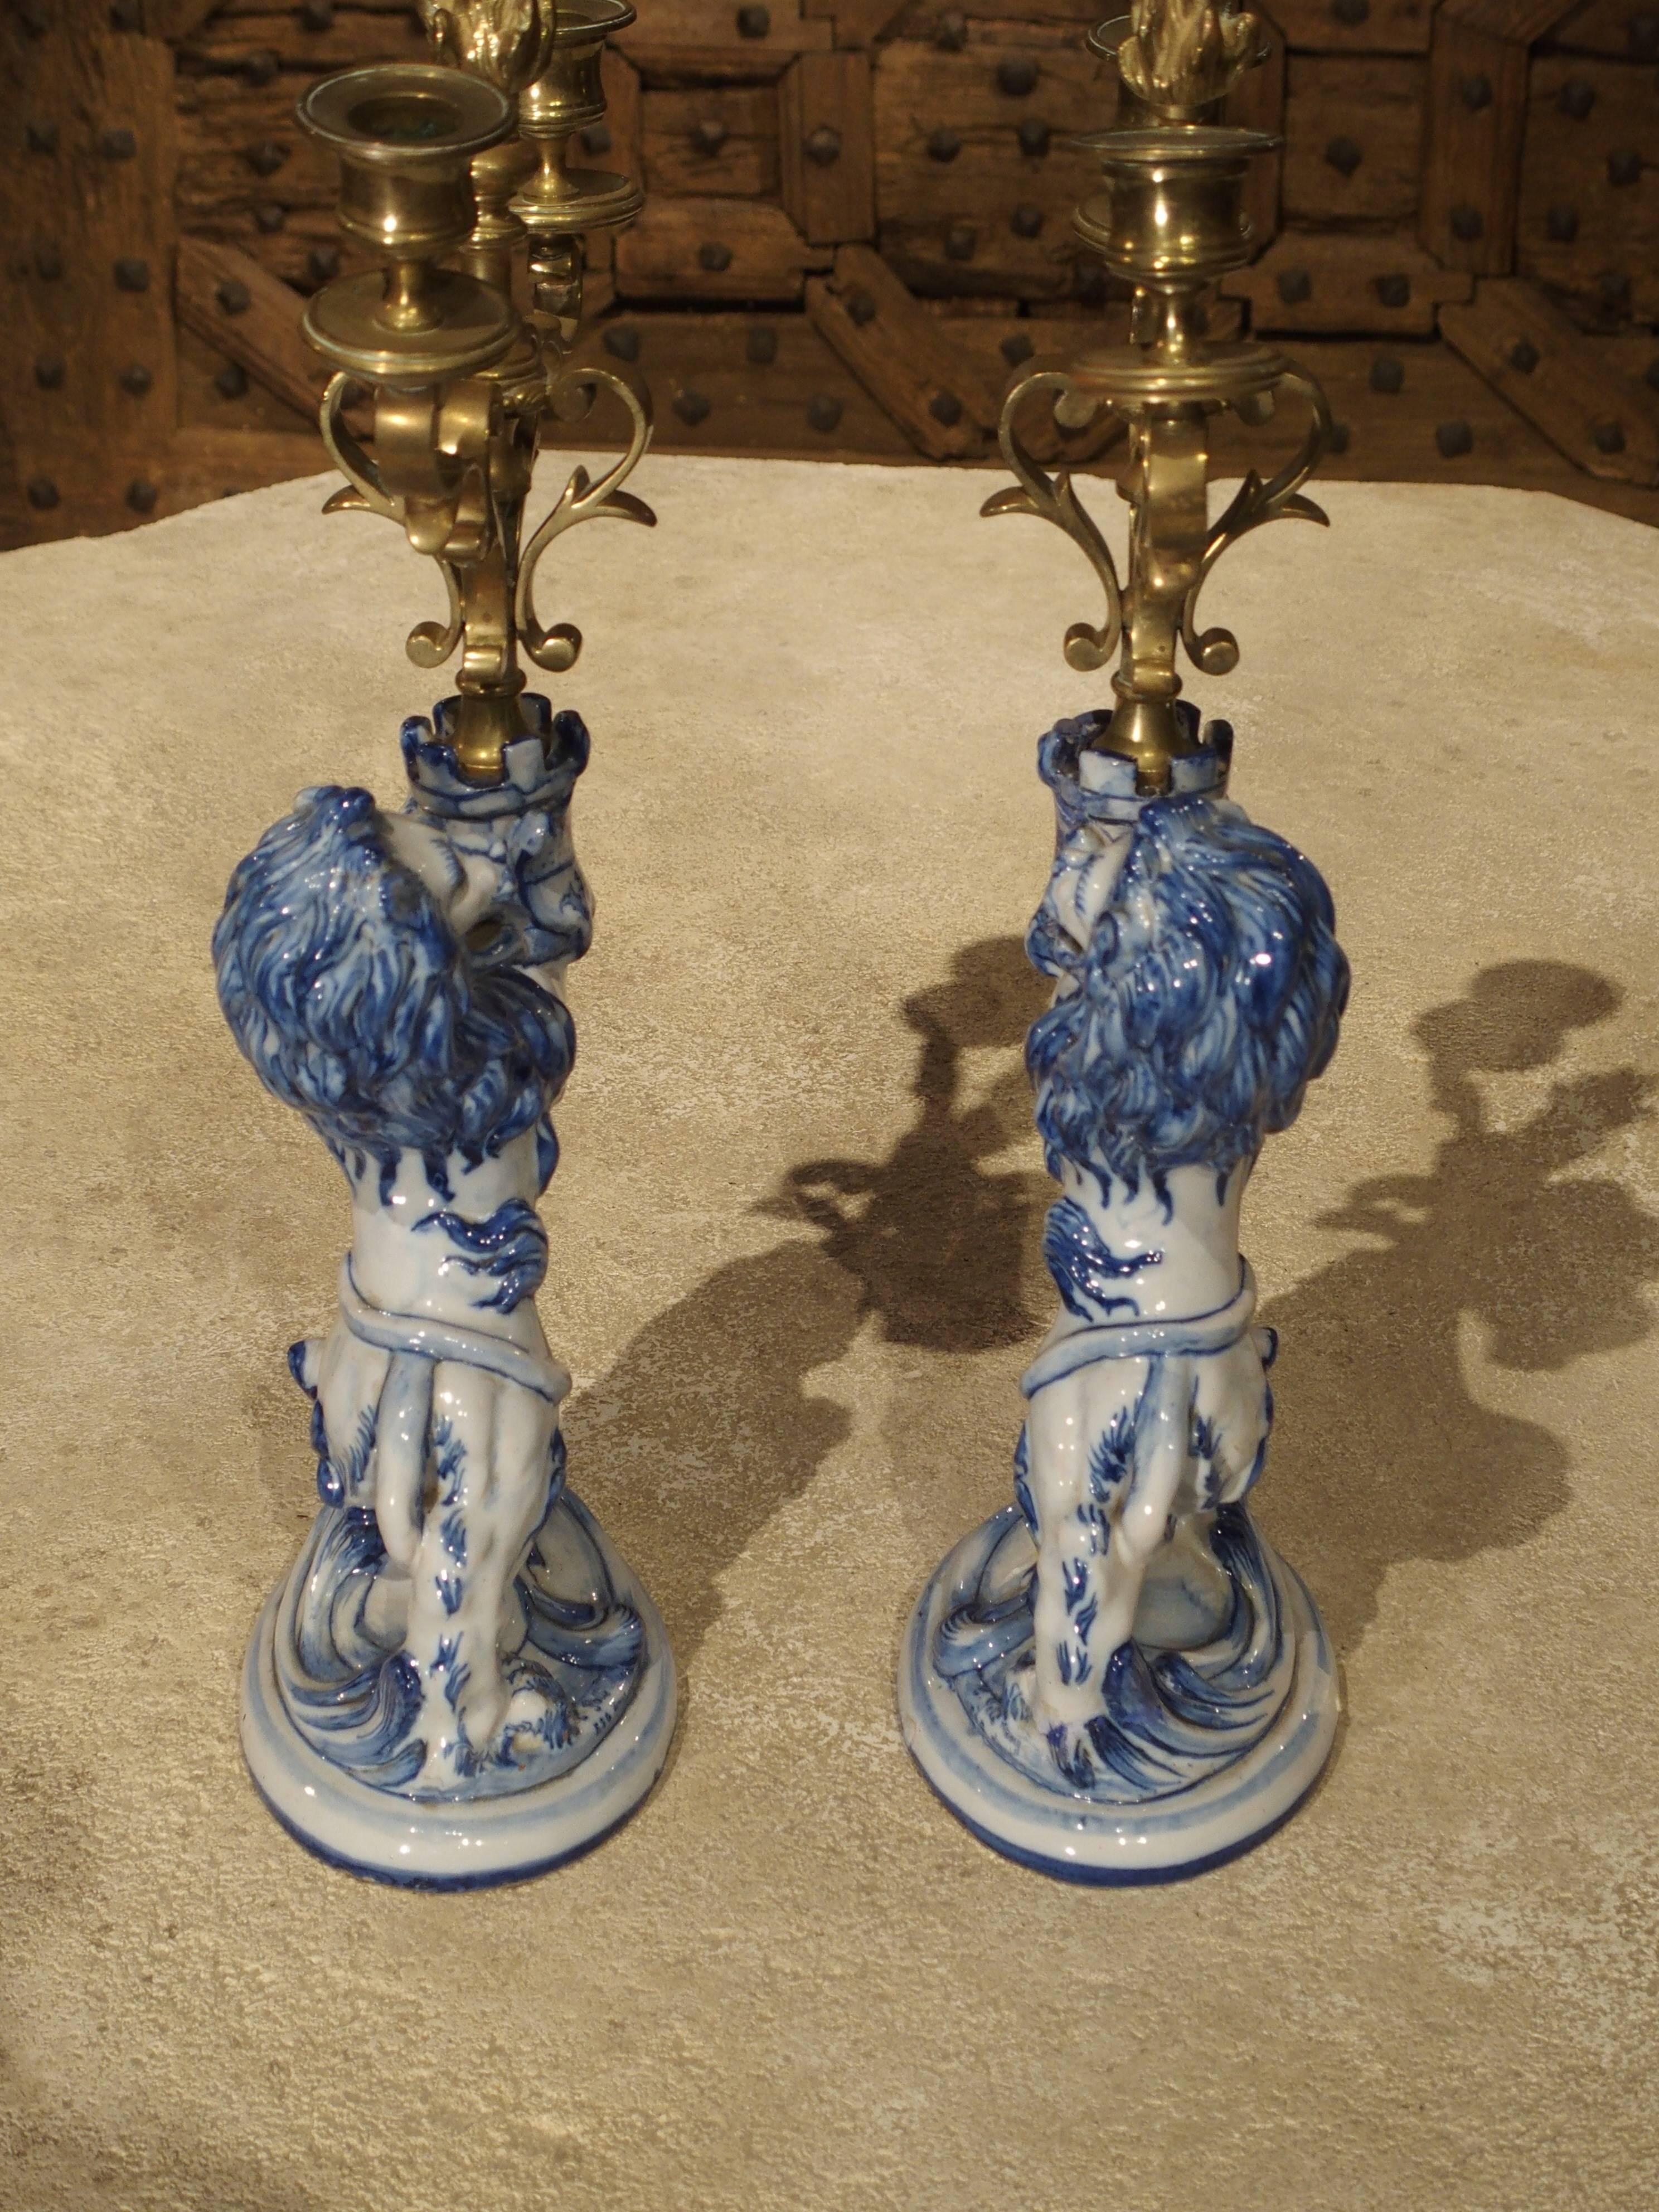 19th Century Pair of Late 1800s Emille Galle Faience Lion Candleholders from France